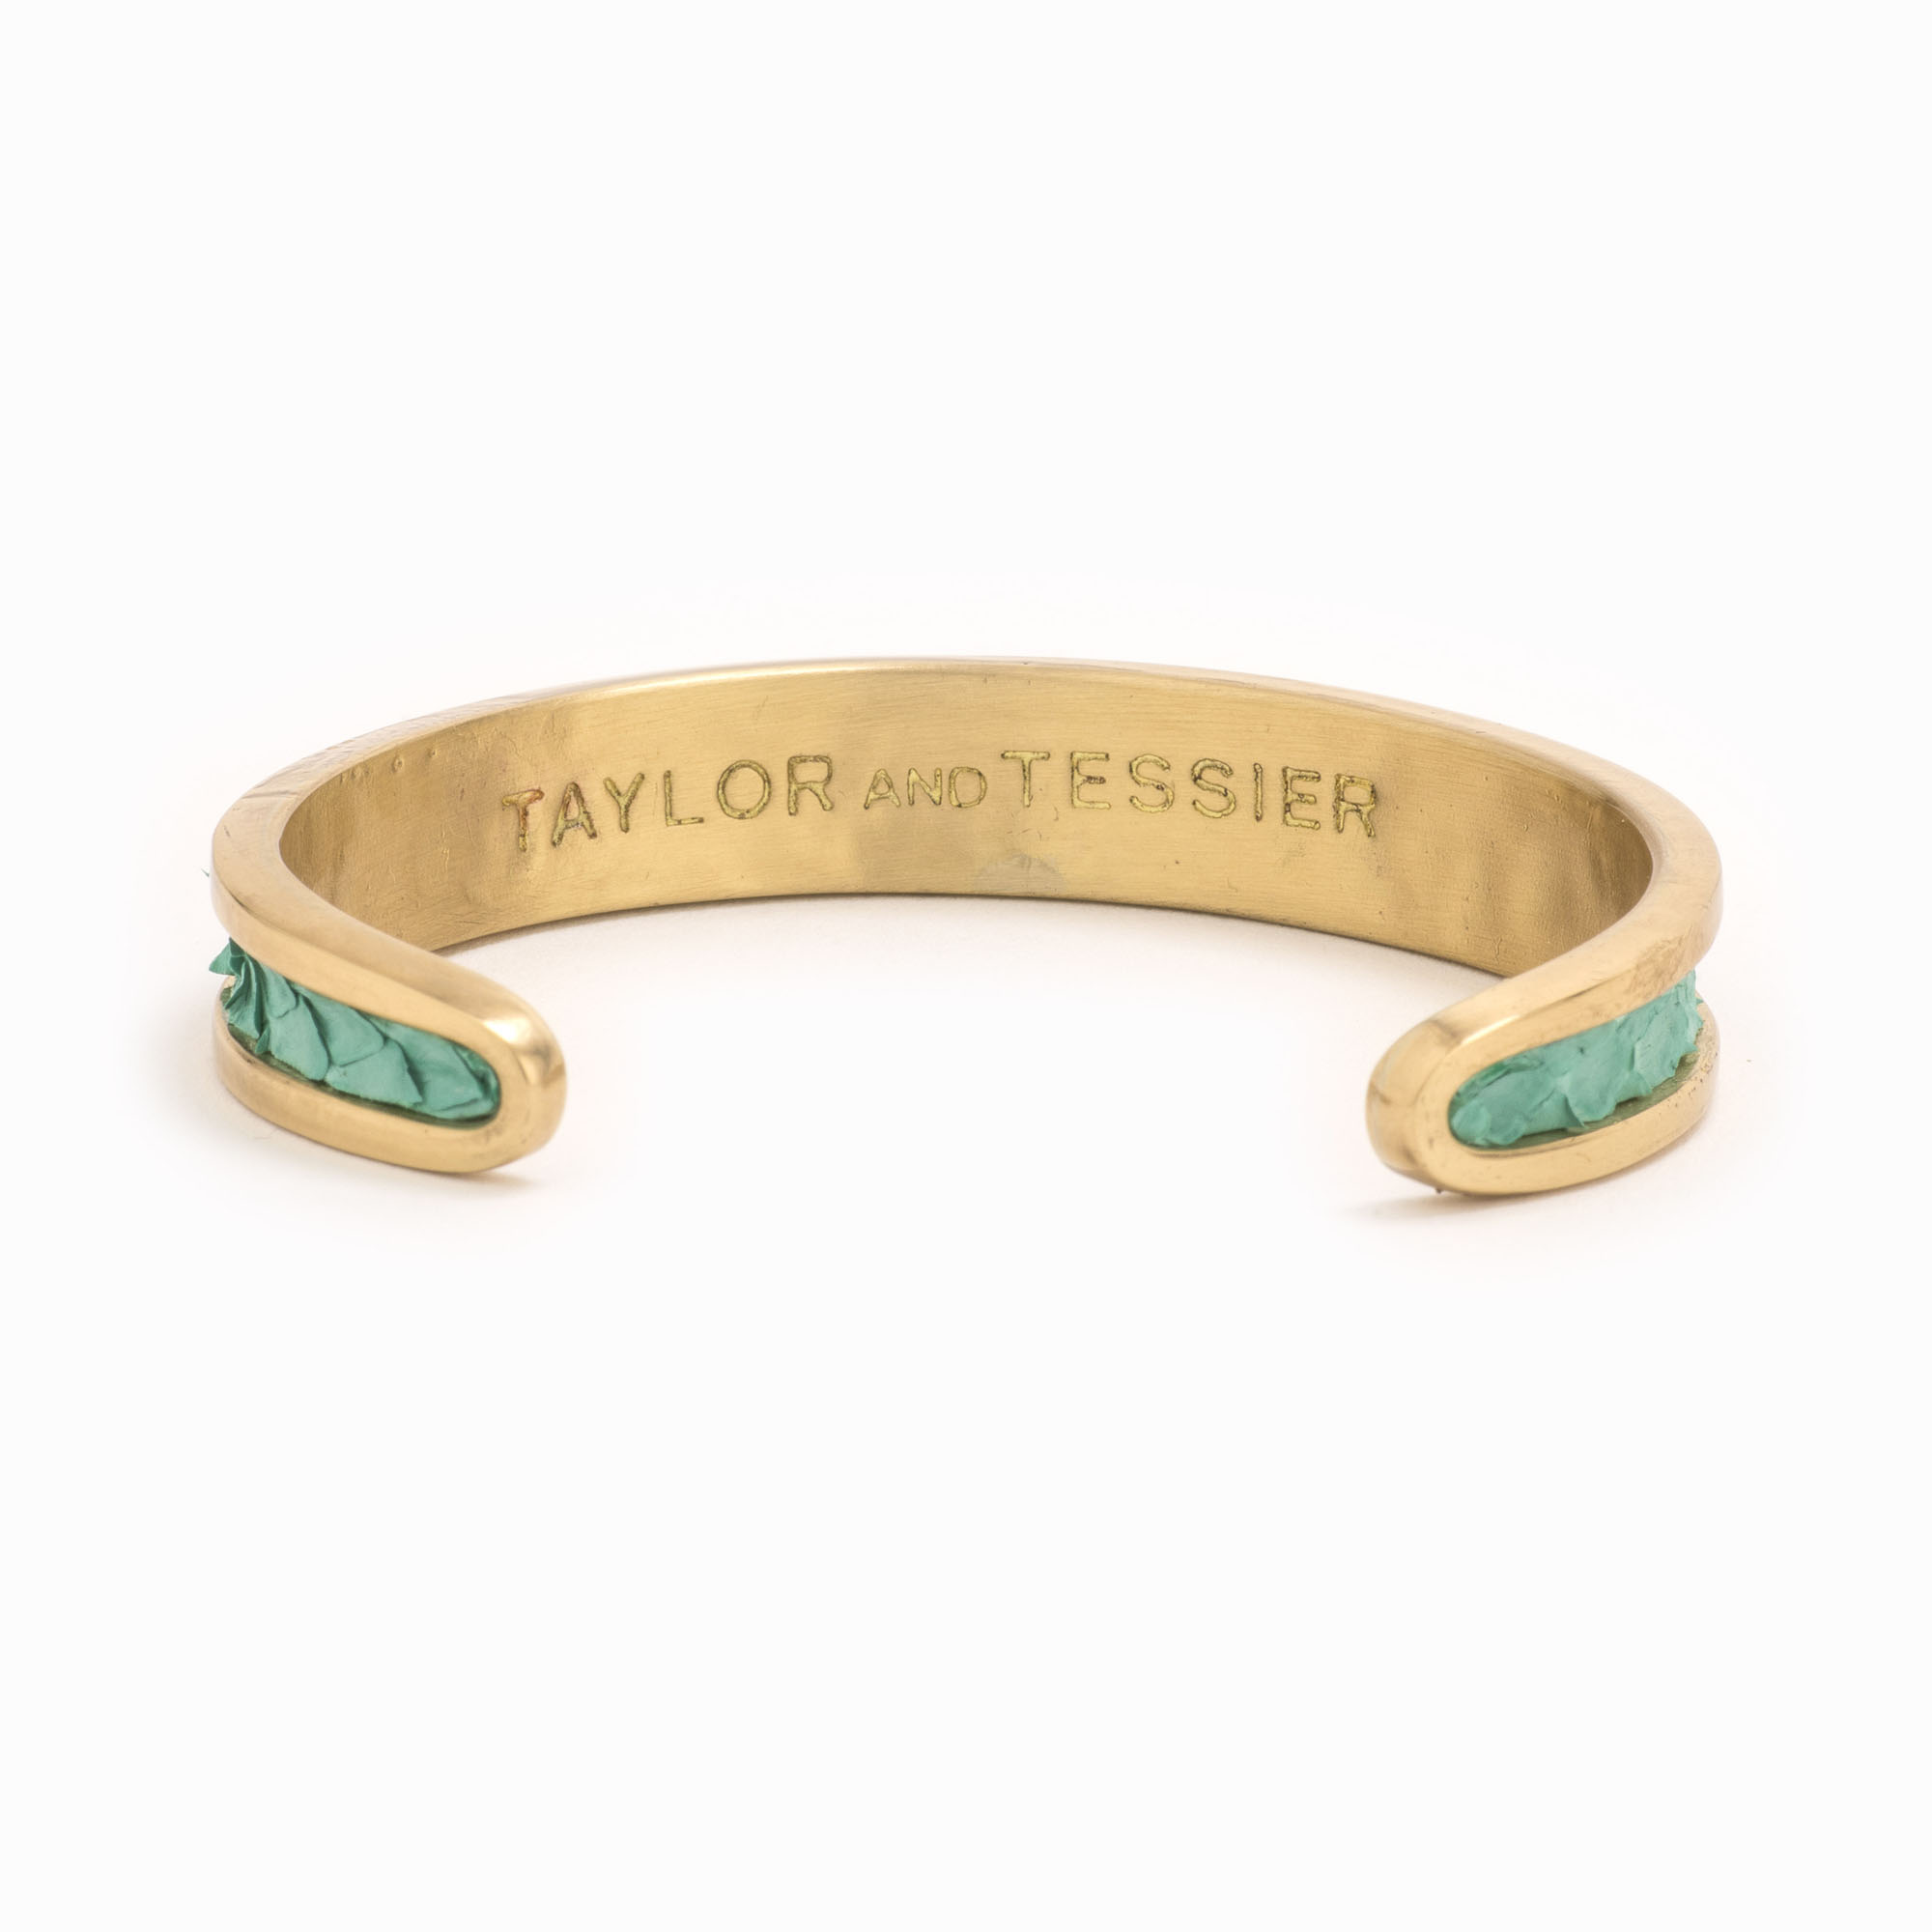 A small gold cuff with turquoise colored snakeskin pattern inlaid.